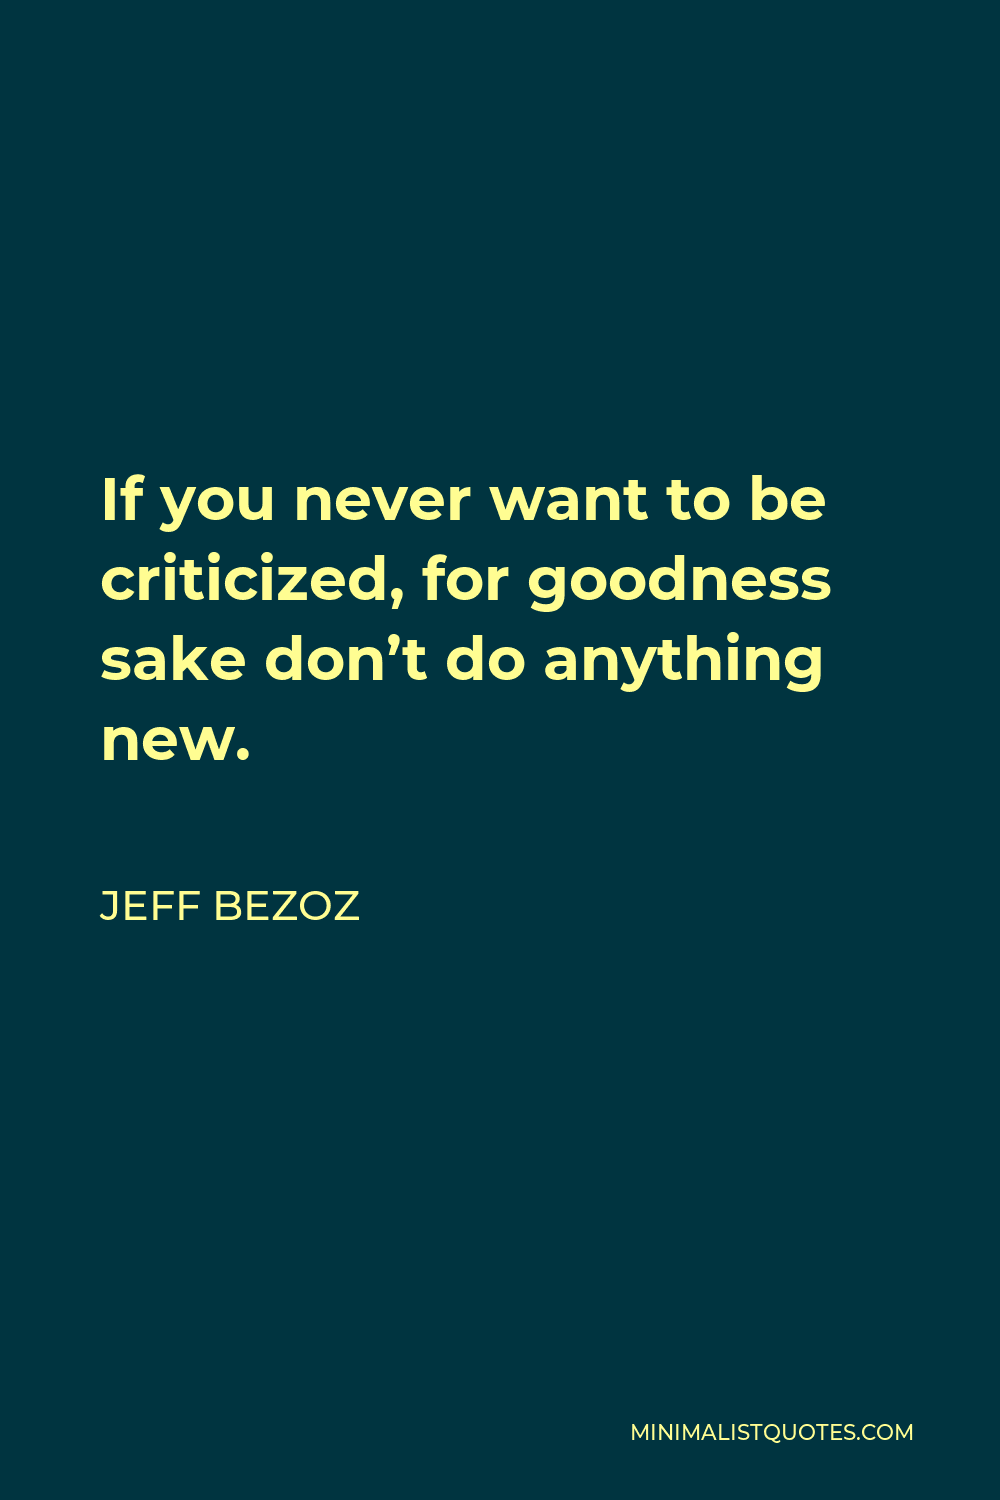 Jeff Bezoz Quote - If you never want to be criticized, for goodness sake don’t do anything new.